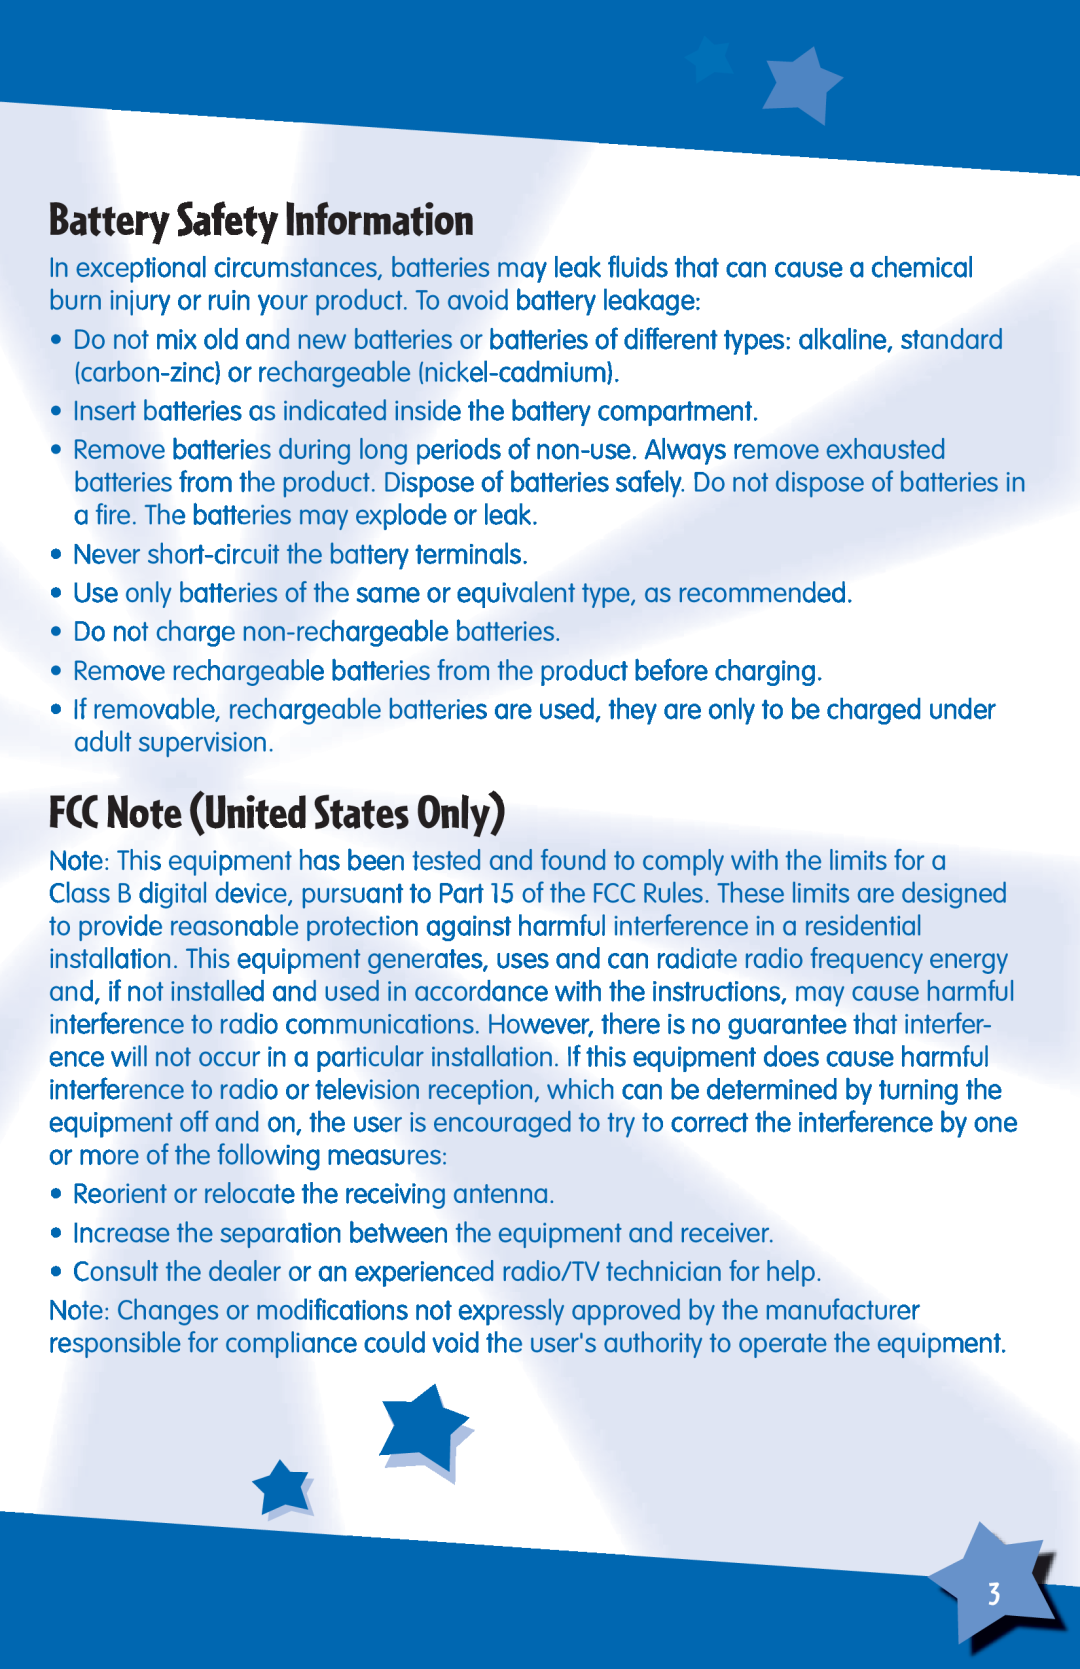 Fisher-Price H6723 instruction sheet Battery Safety Information, FCC Note United States Only 